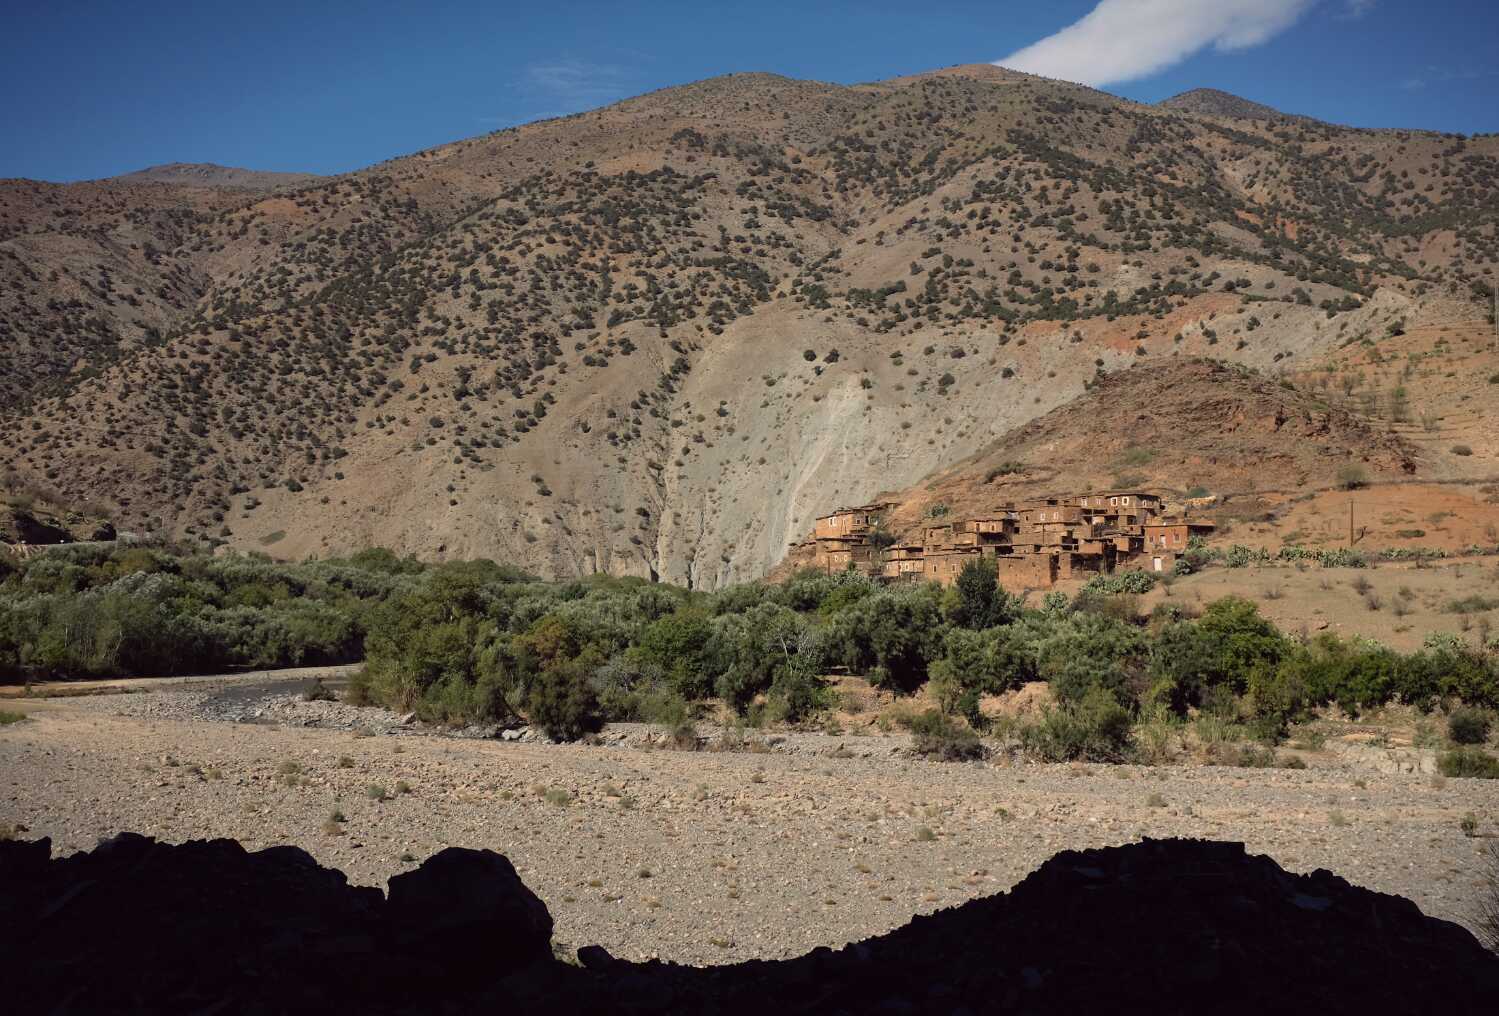 The hills are dotted with tiny Berber villages. Fixed 35mm lens has limitations in such cases but I'm happy